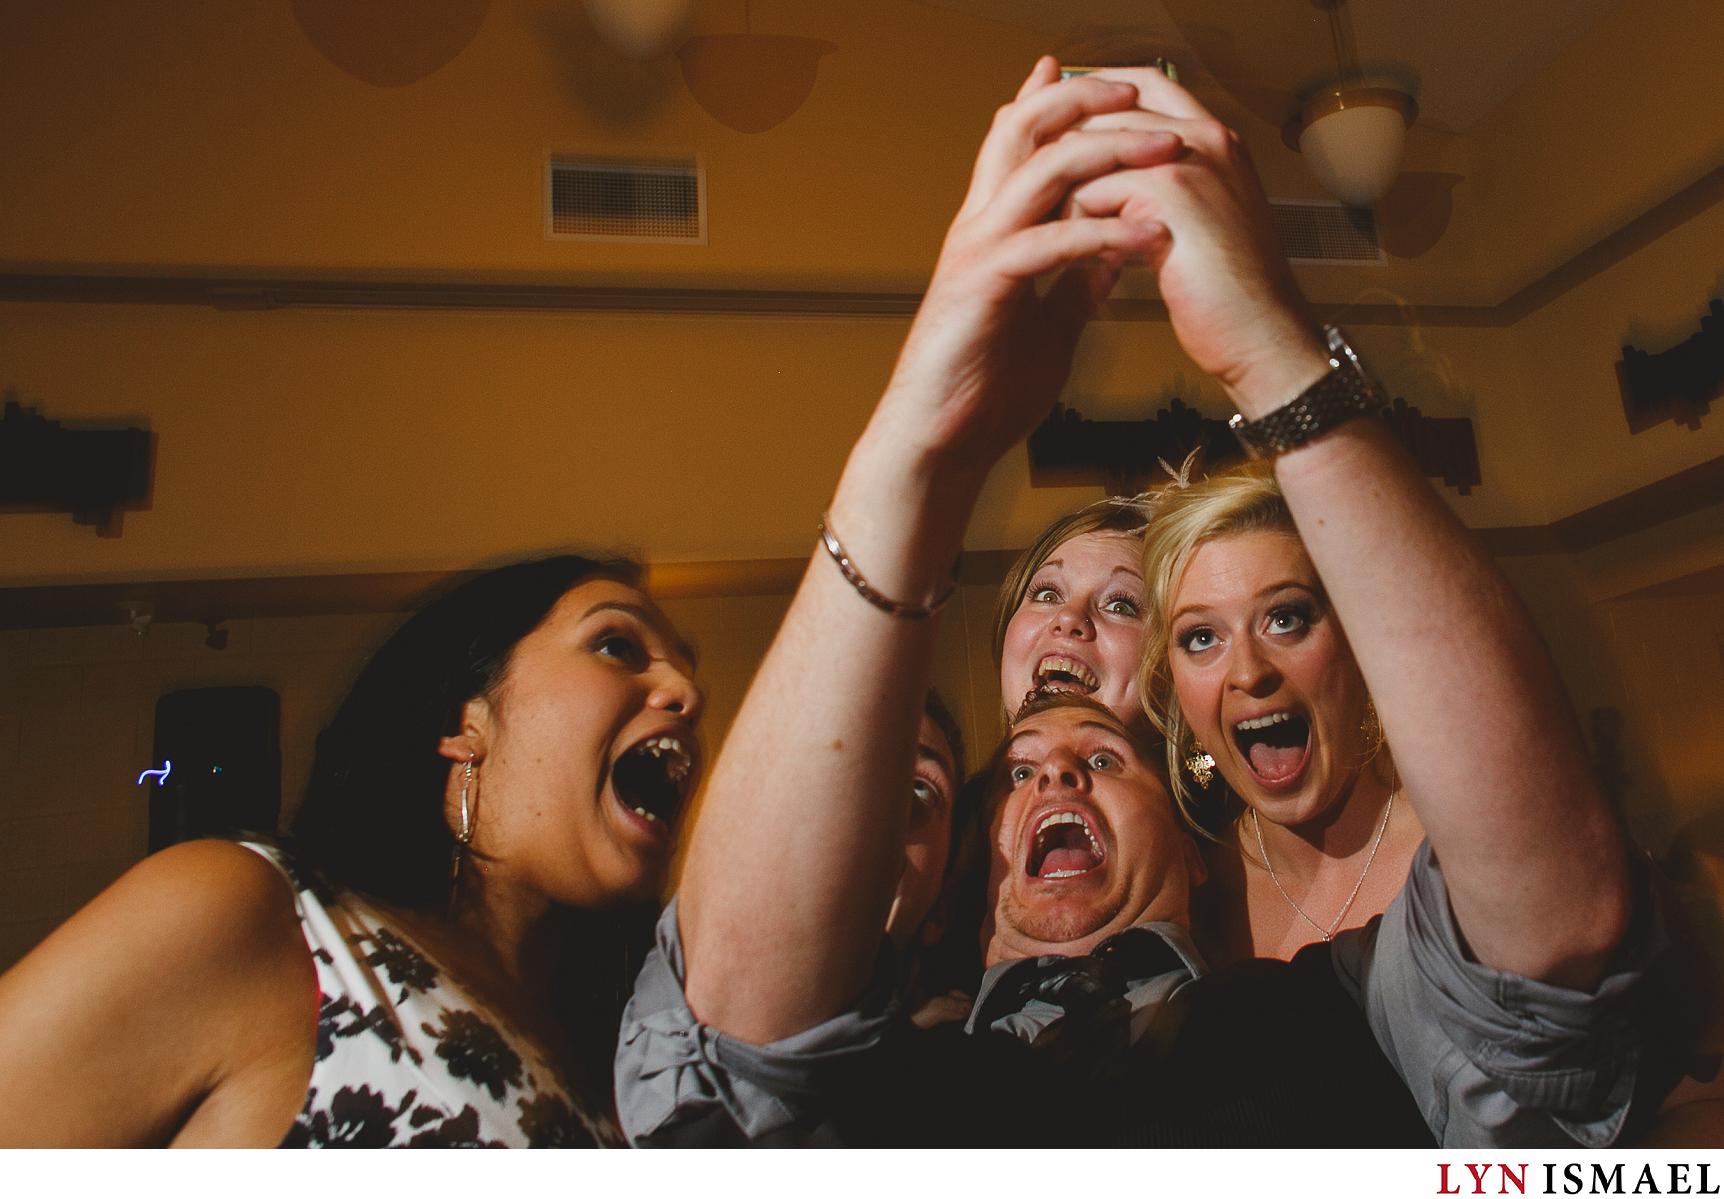 Wedding guests post for a selfie at a Stoney Creek wedding reception.